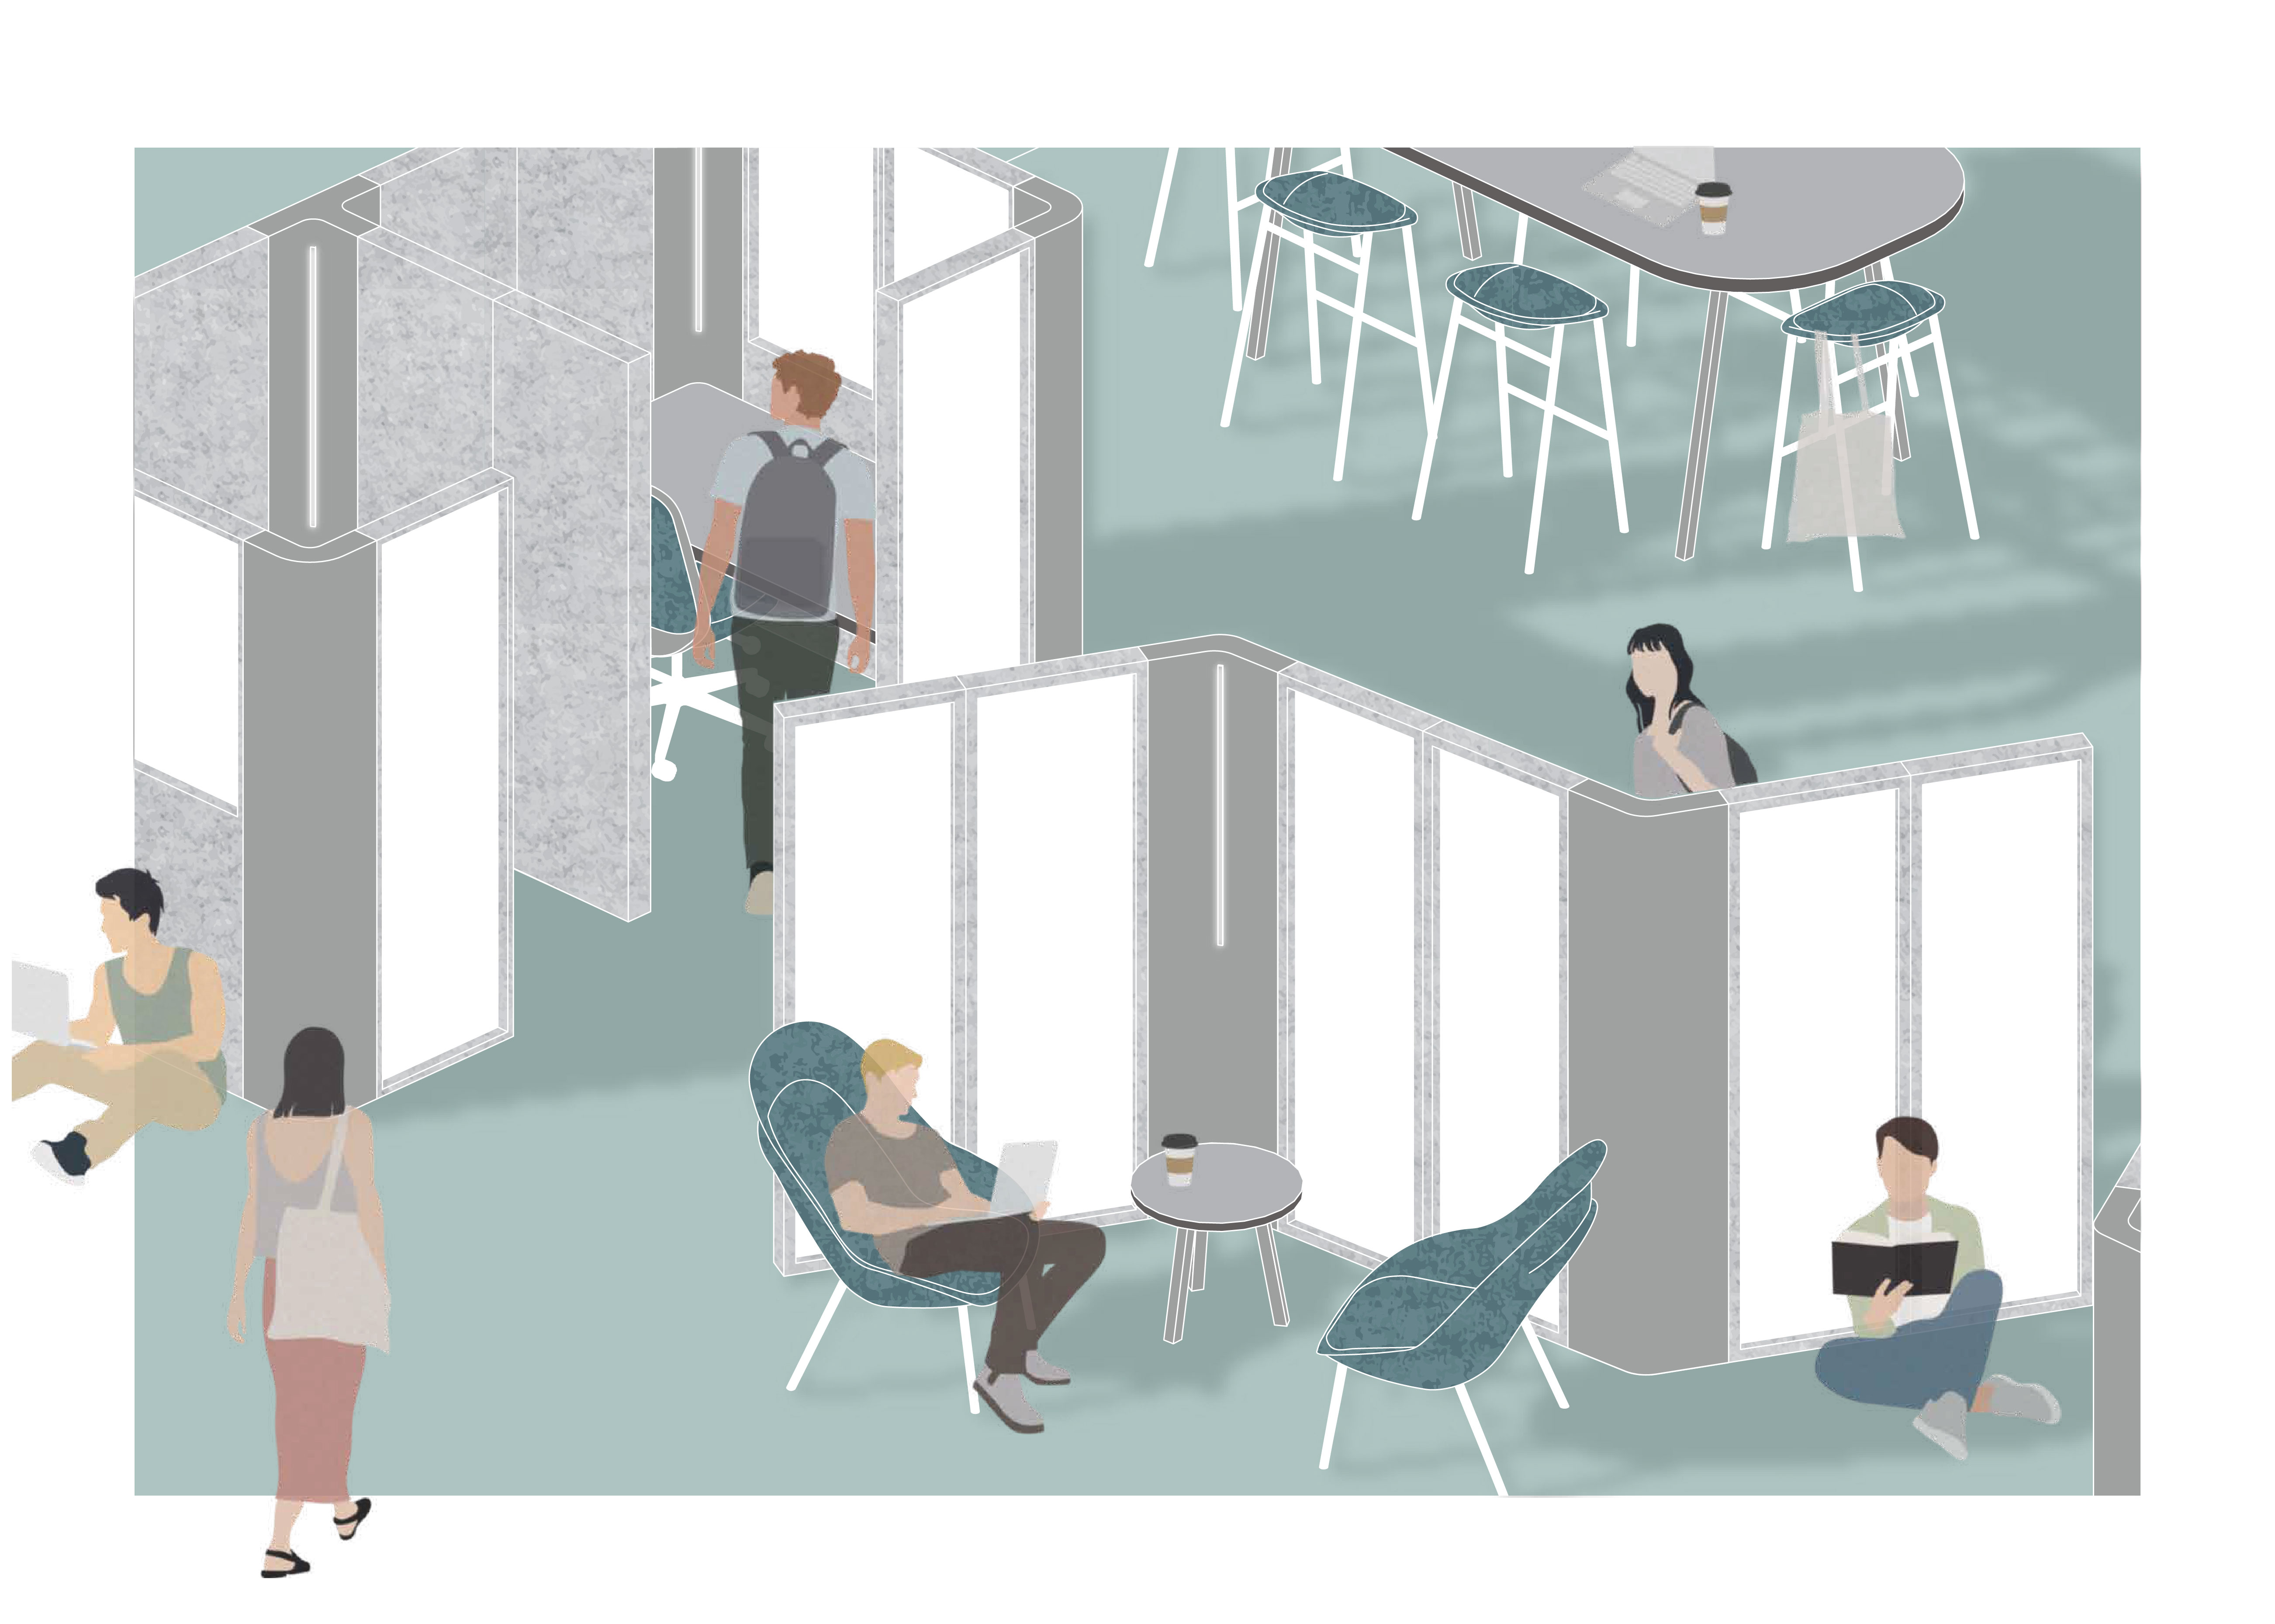 An axonometric illustration by Charley Arnold showing campus space in blues and grays. Space has social area, private study booths and collaborative desk.